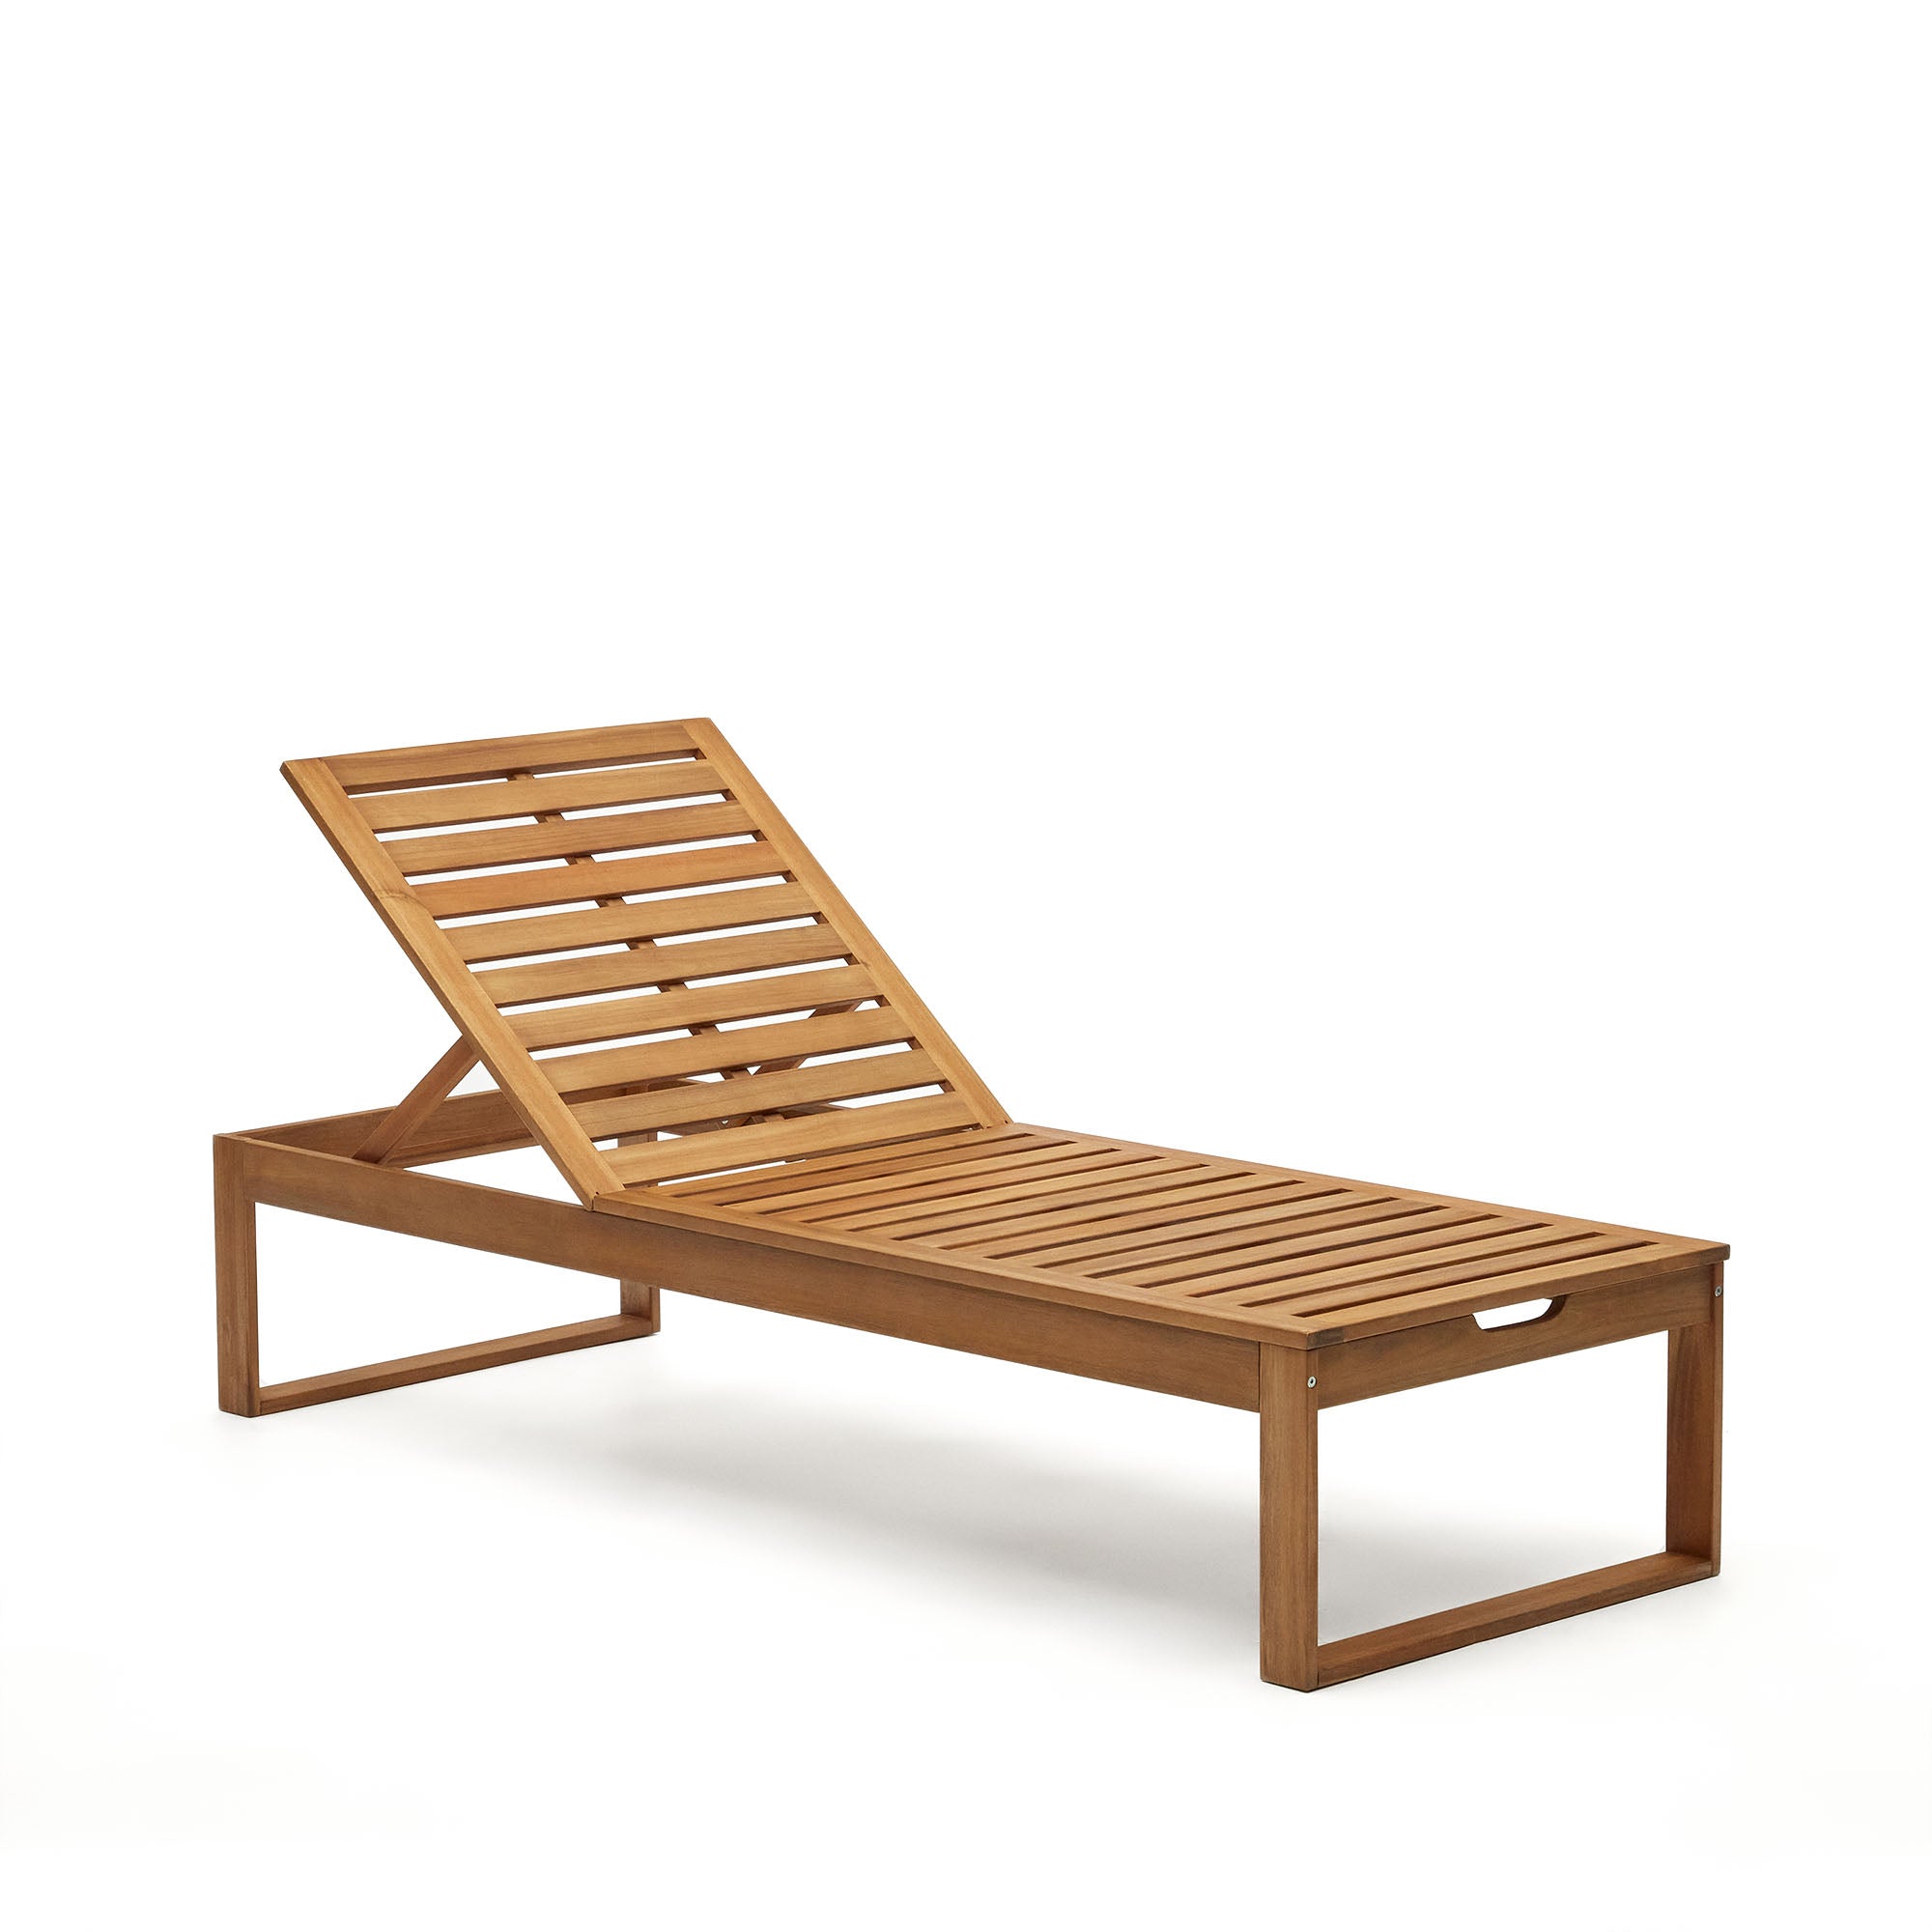 Sulamita outdoor sun lounger made from solid acacia wood FSC 100%